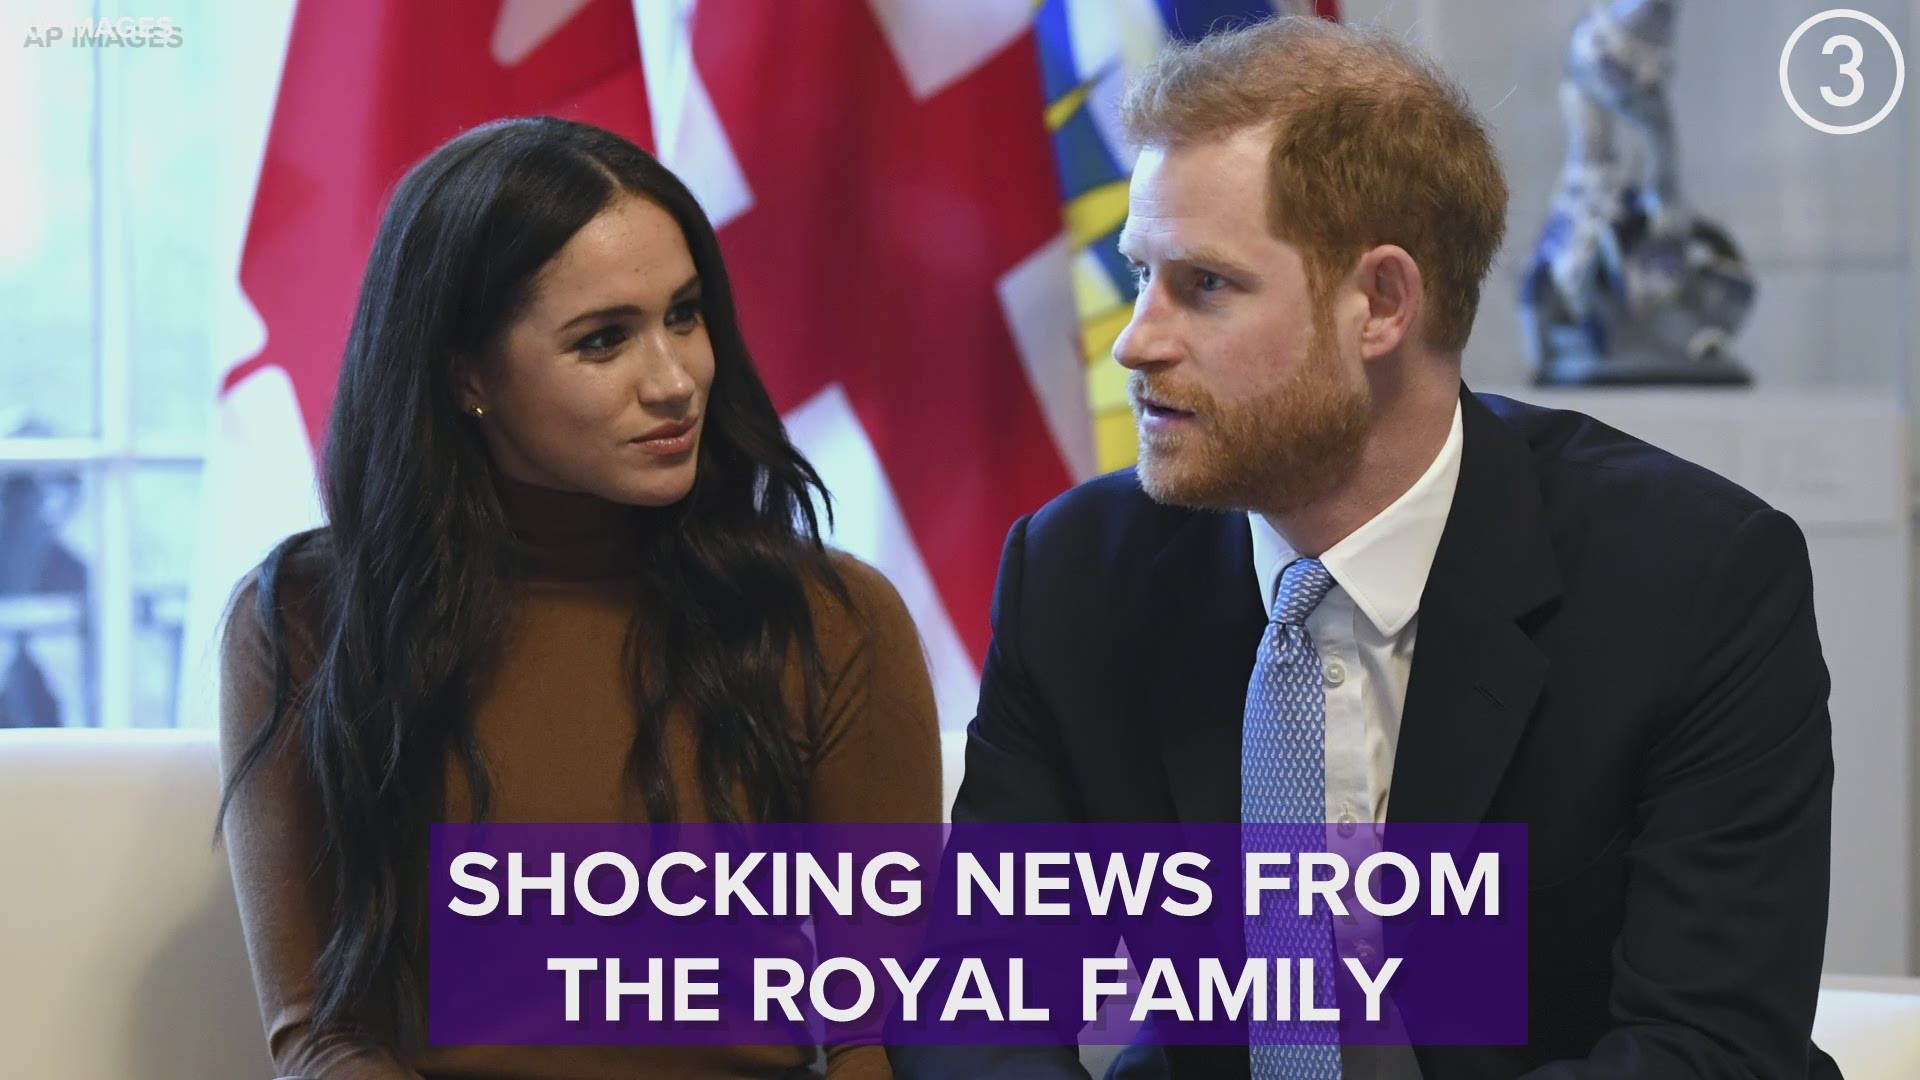 Shocking news from the Royal Family!  The couple said they want to become financially independent.